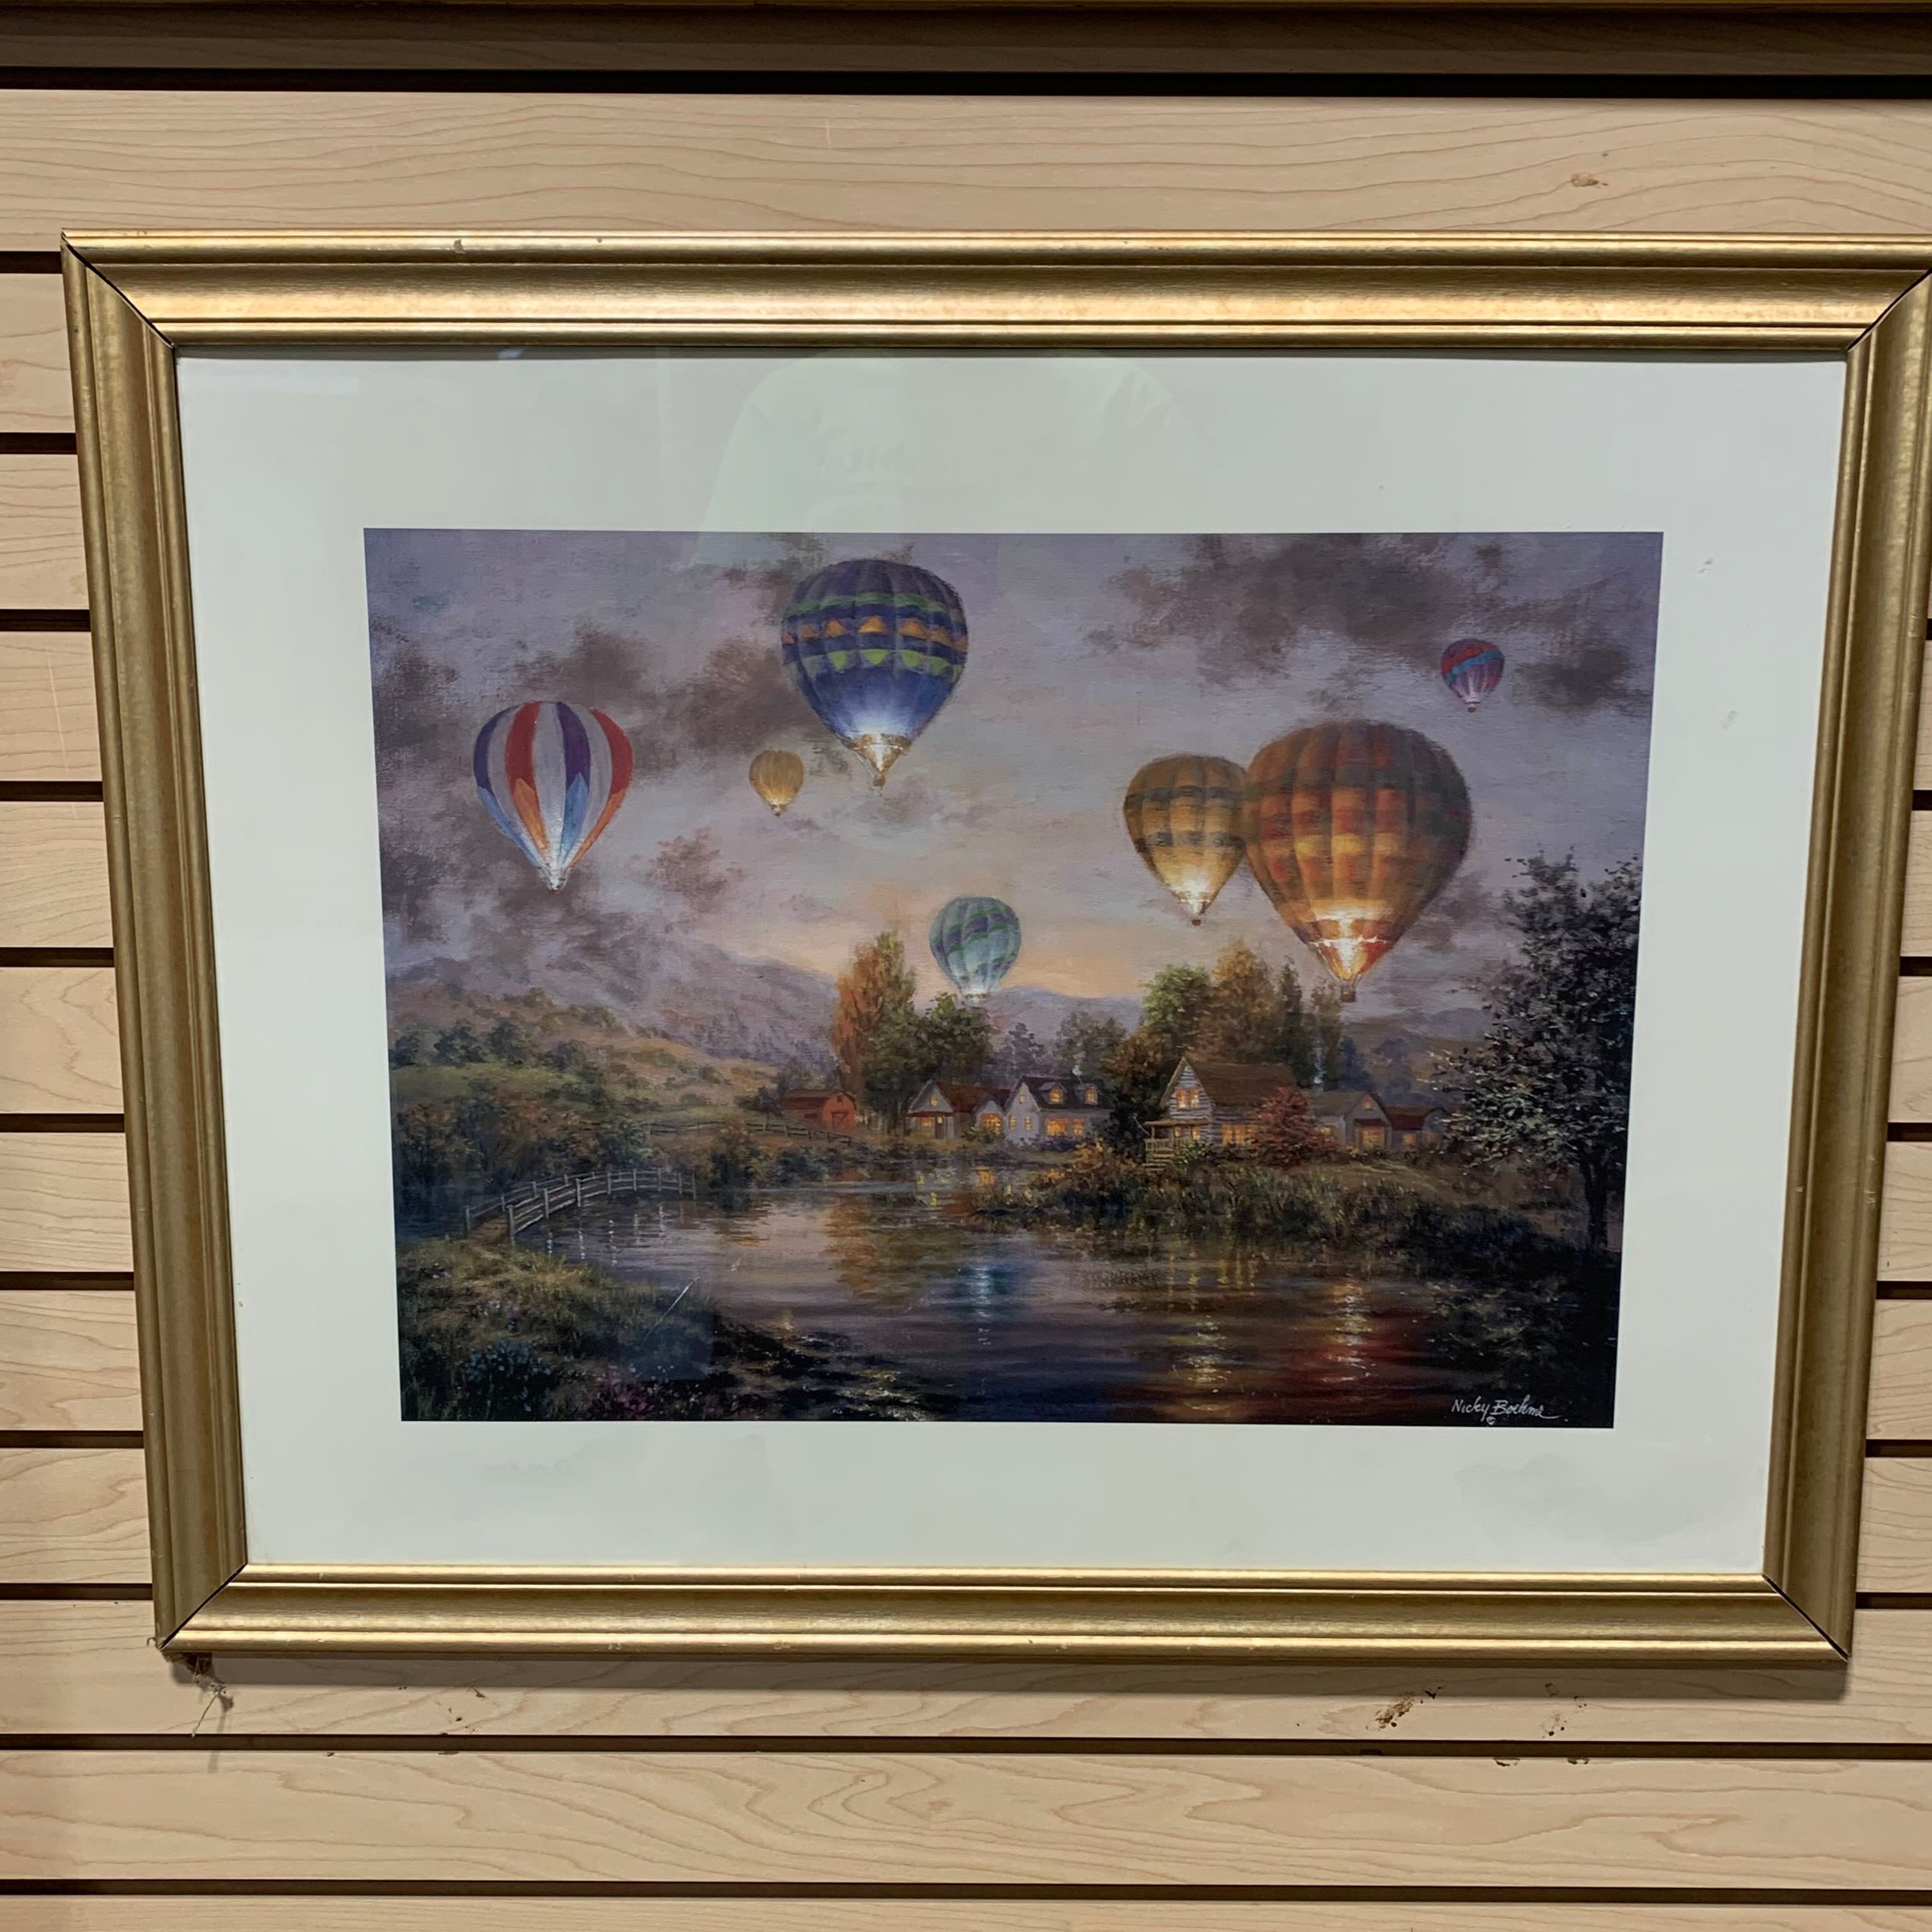 31"x 25.5" Balloon Glow by Nicky Boehme Framed Print